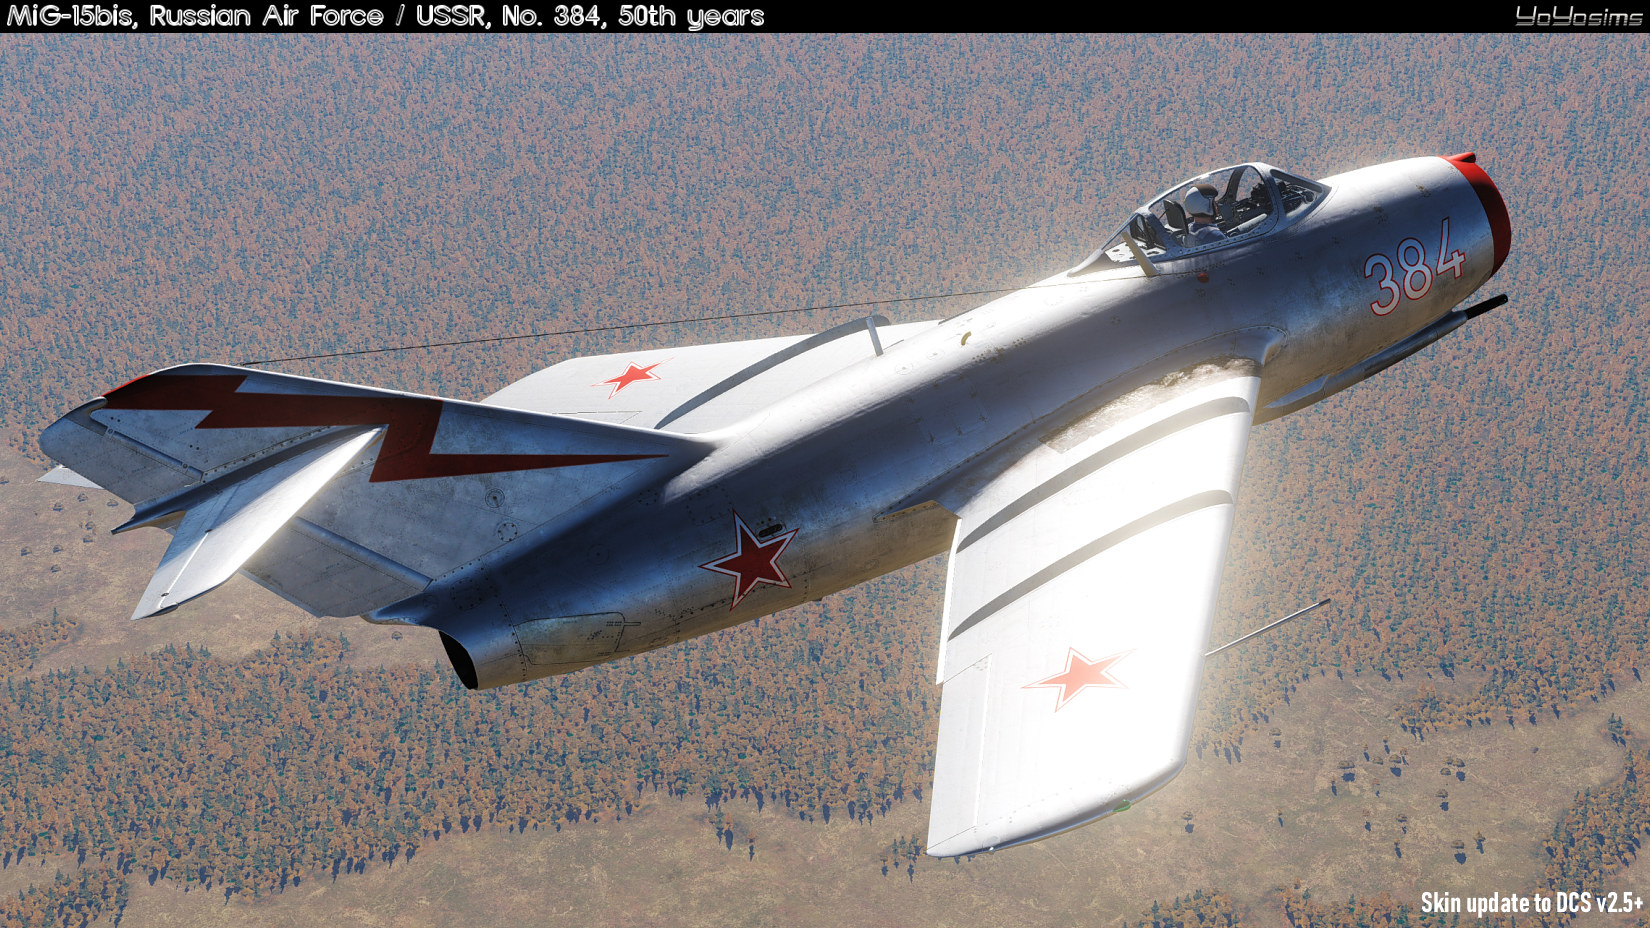 MiG-15bis, Russian Air Force, No. 384